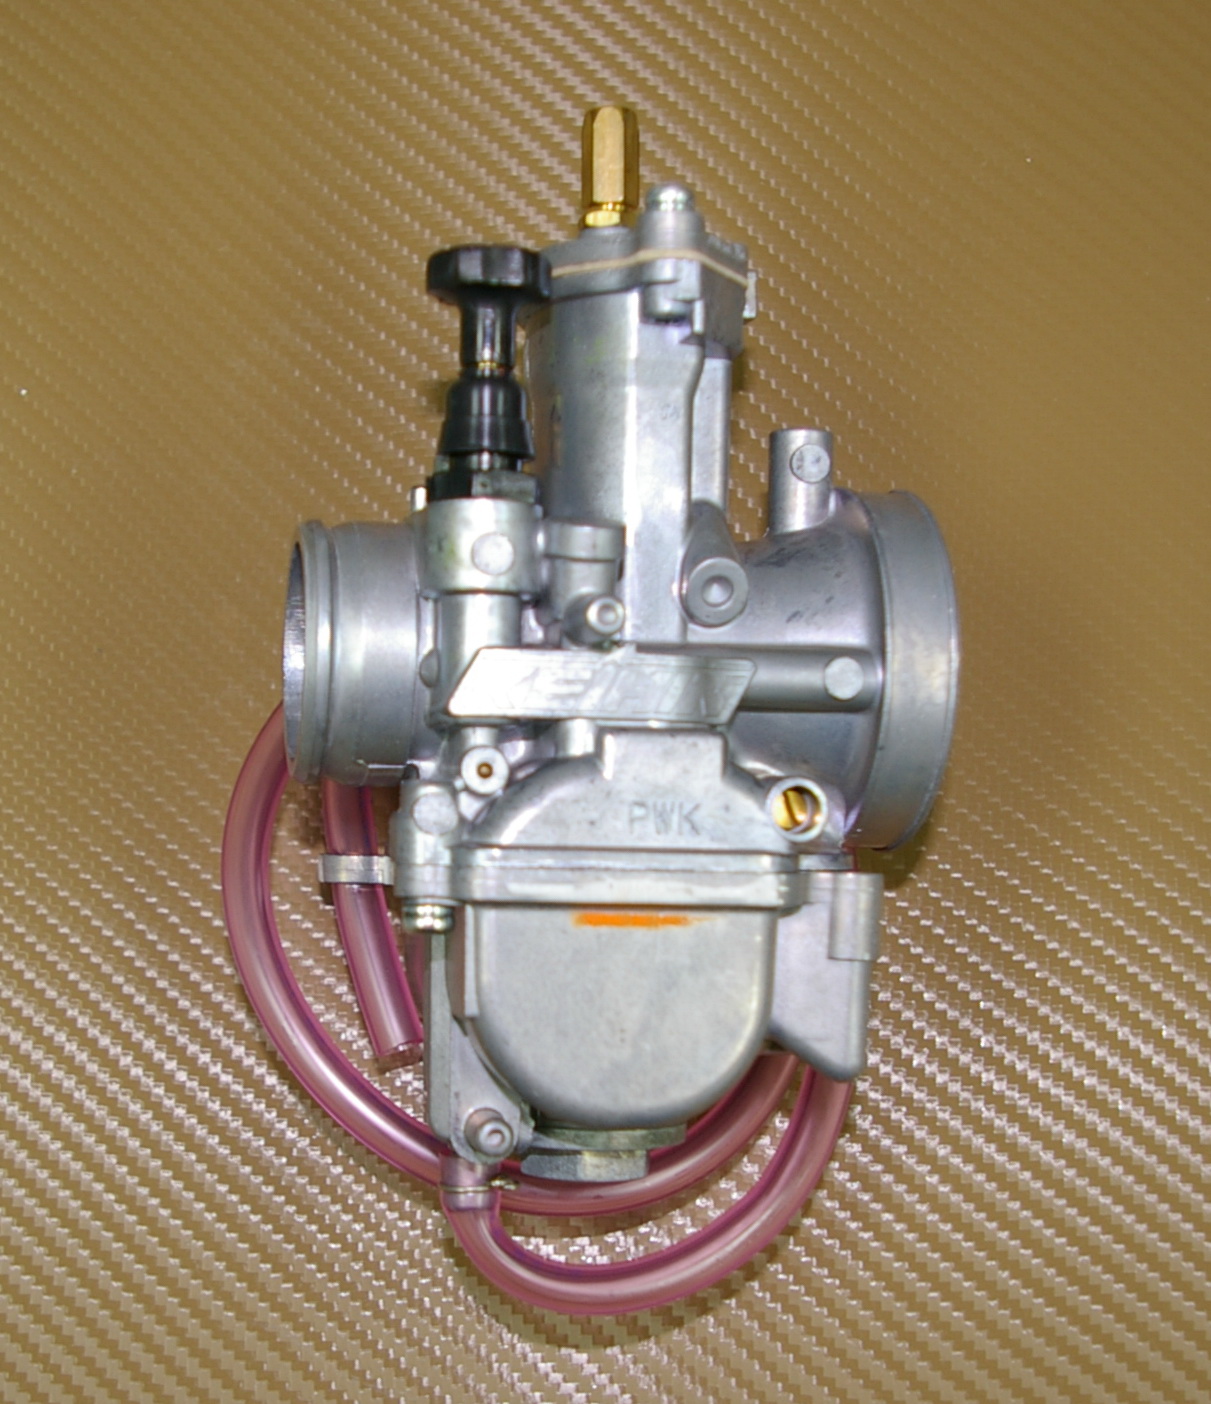 An image of a 28mm PWK Keihin Carburetor Kit, Part 22-5841 with a pink hose.